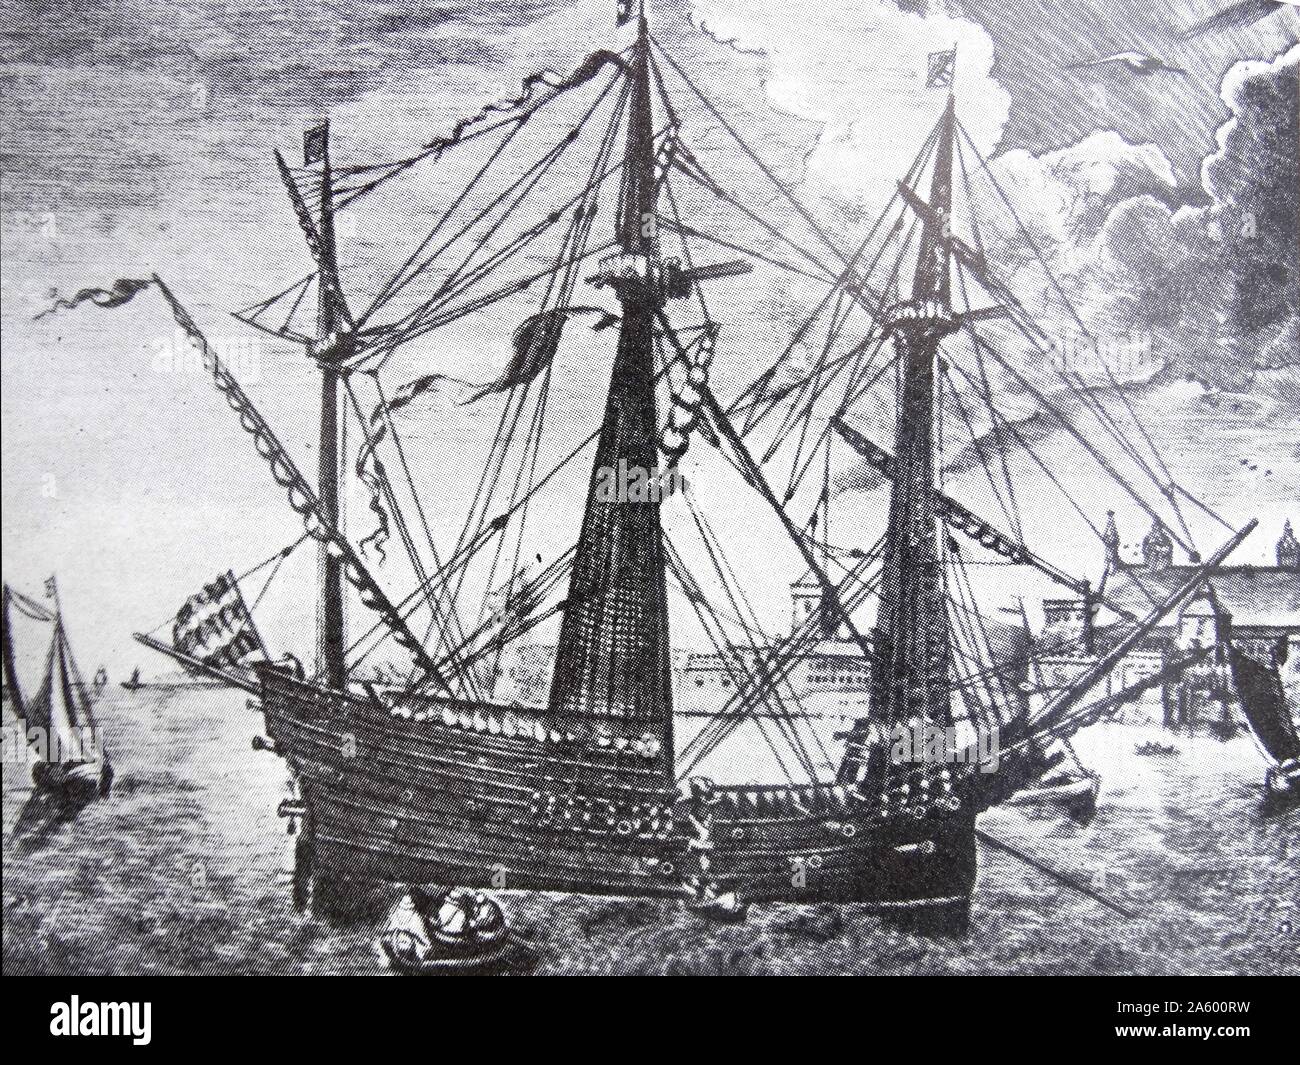 Illustration of the Golden Hind, an English galleon best known for her circumnavigation of the globe between 1577 and 1580, captained by Sir Francis Drake. Dated 16th Century Stock Photo